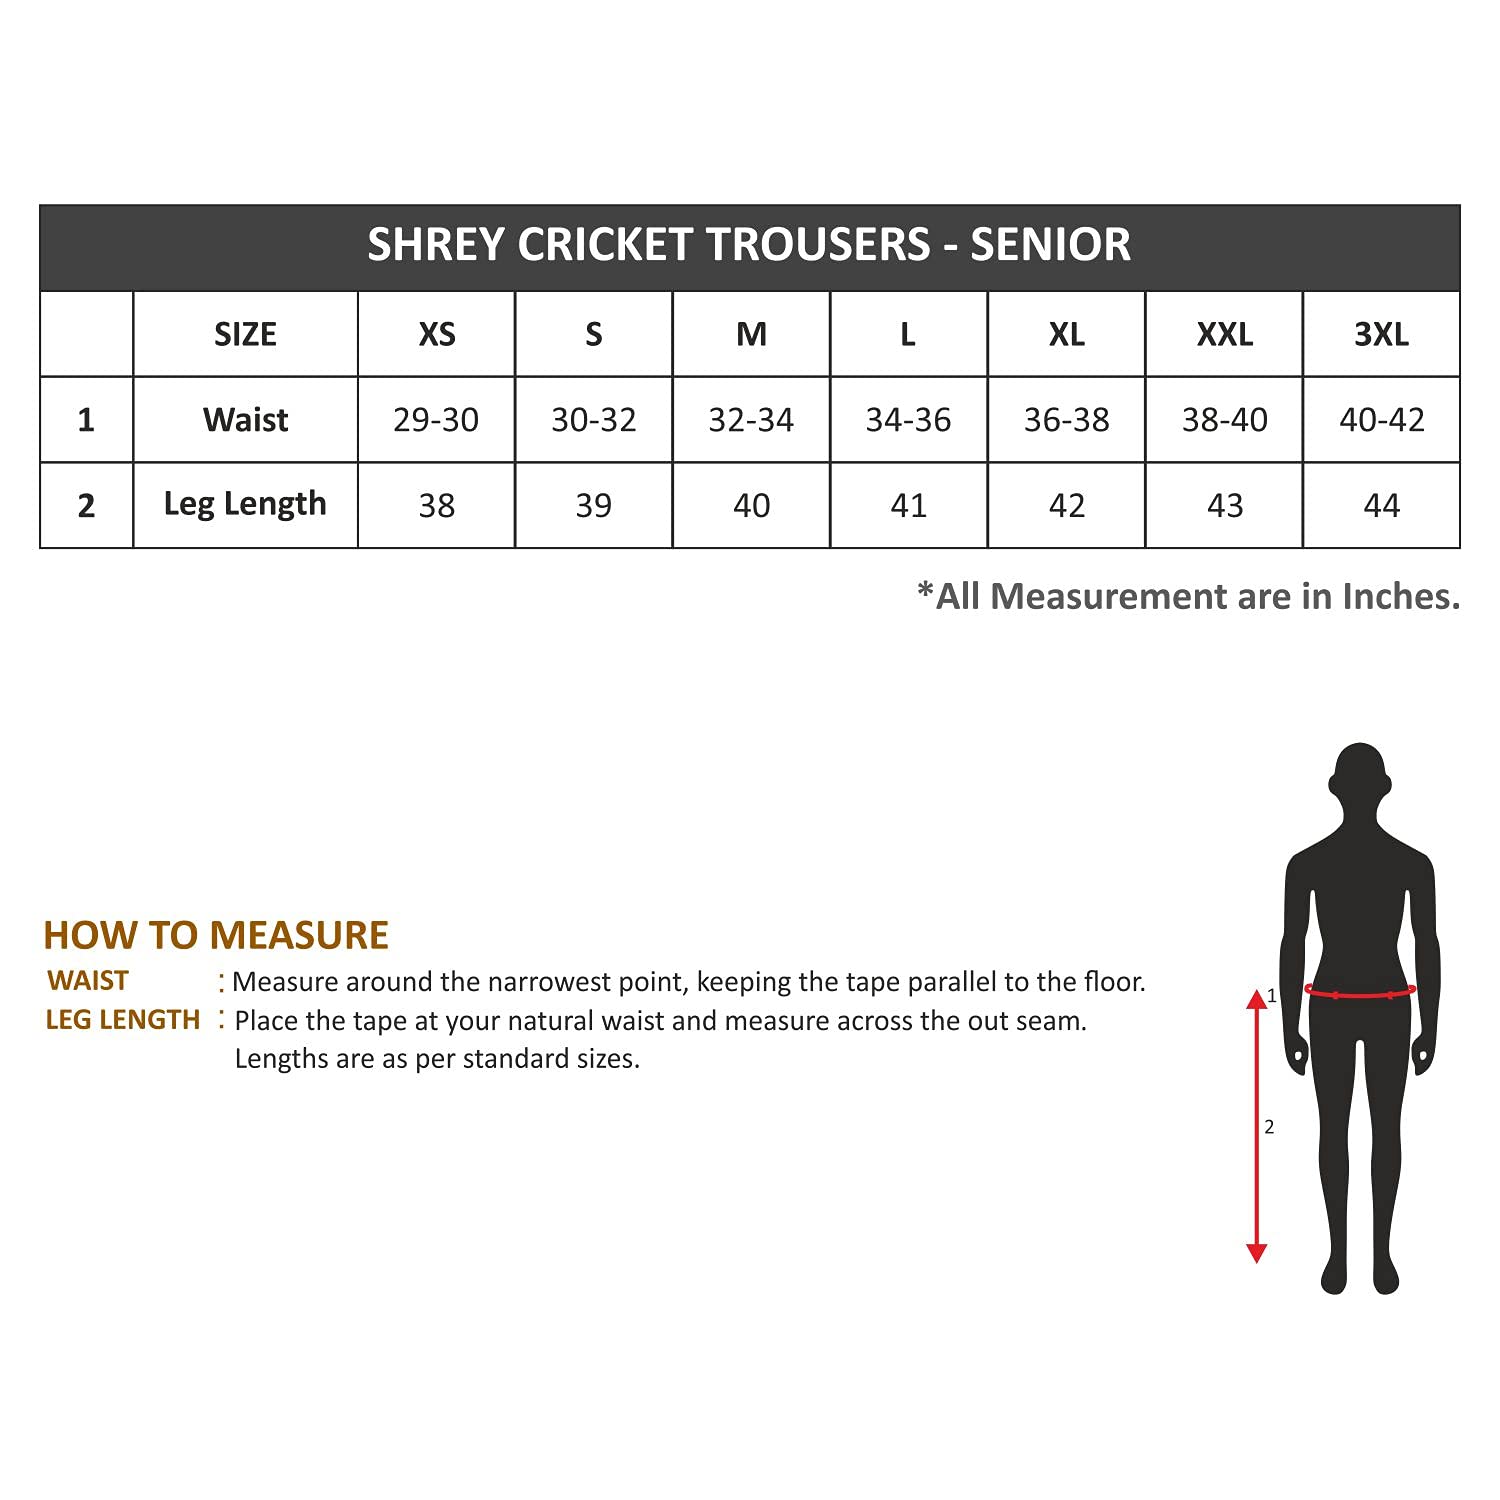 Cricket Trousers white cricket trousers online  MR Cricket Hockey